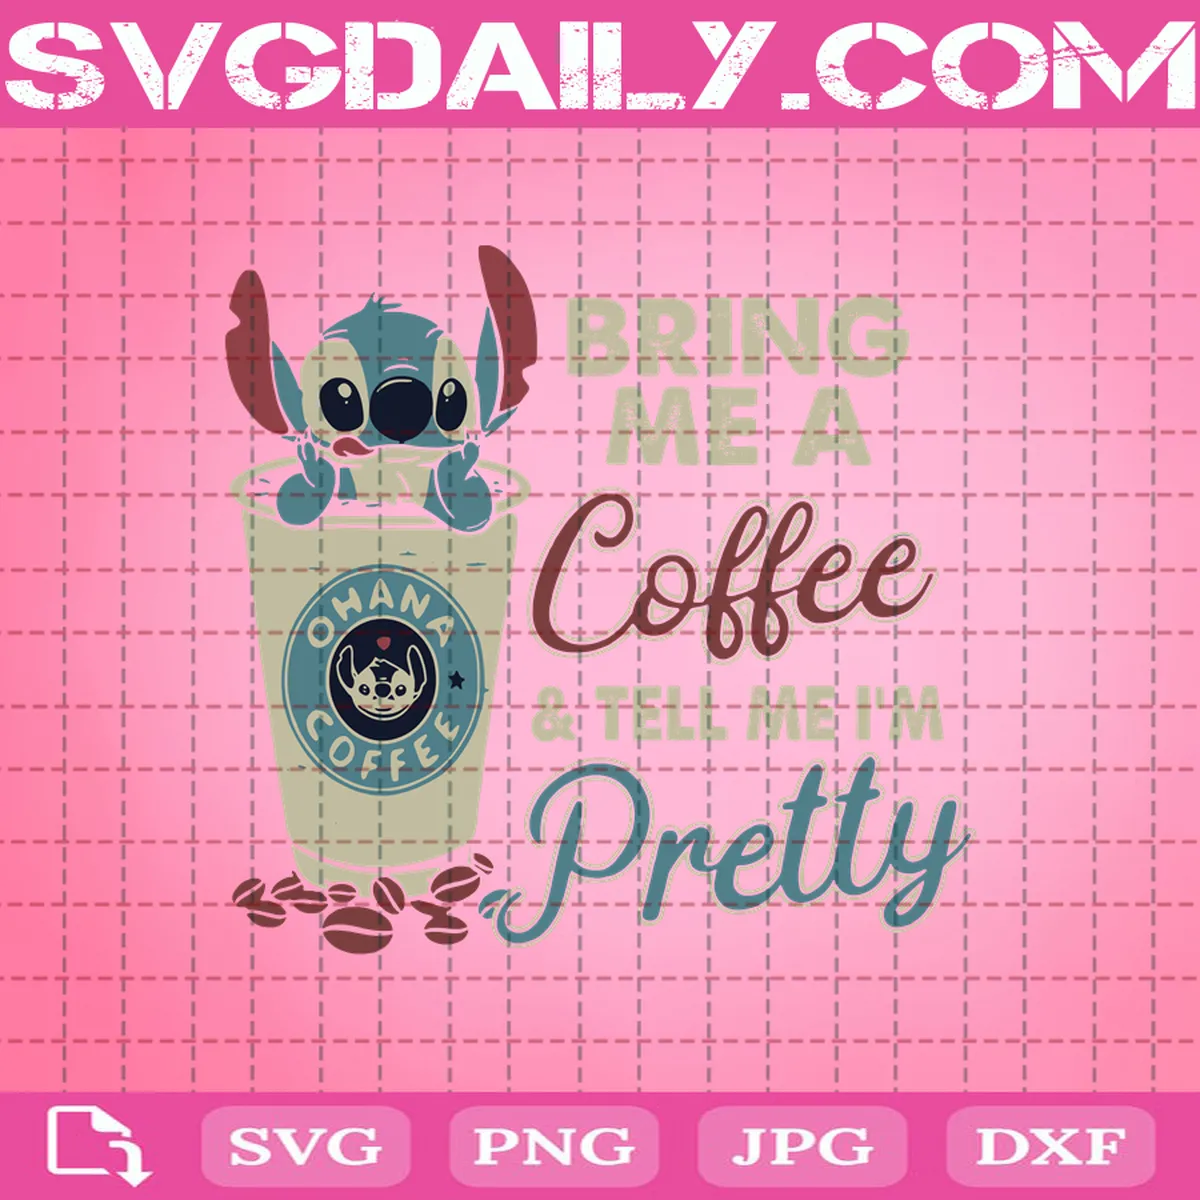 Bring Me A Coffee And Tell Me I'm Pretty Svg, Cute Coffee Svg, Ohana Coffee Svg, Stitch Coffee Svg, Stitch Svg, Coffee Svg